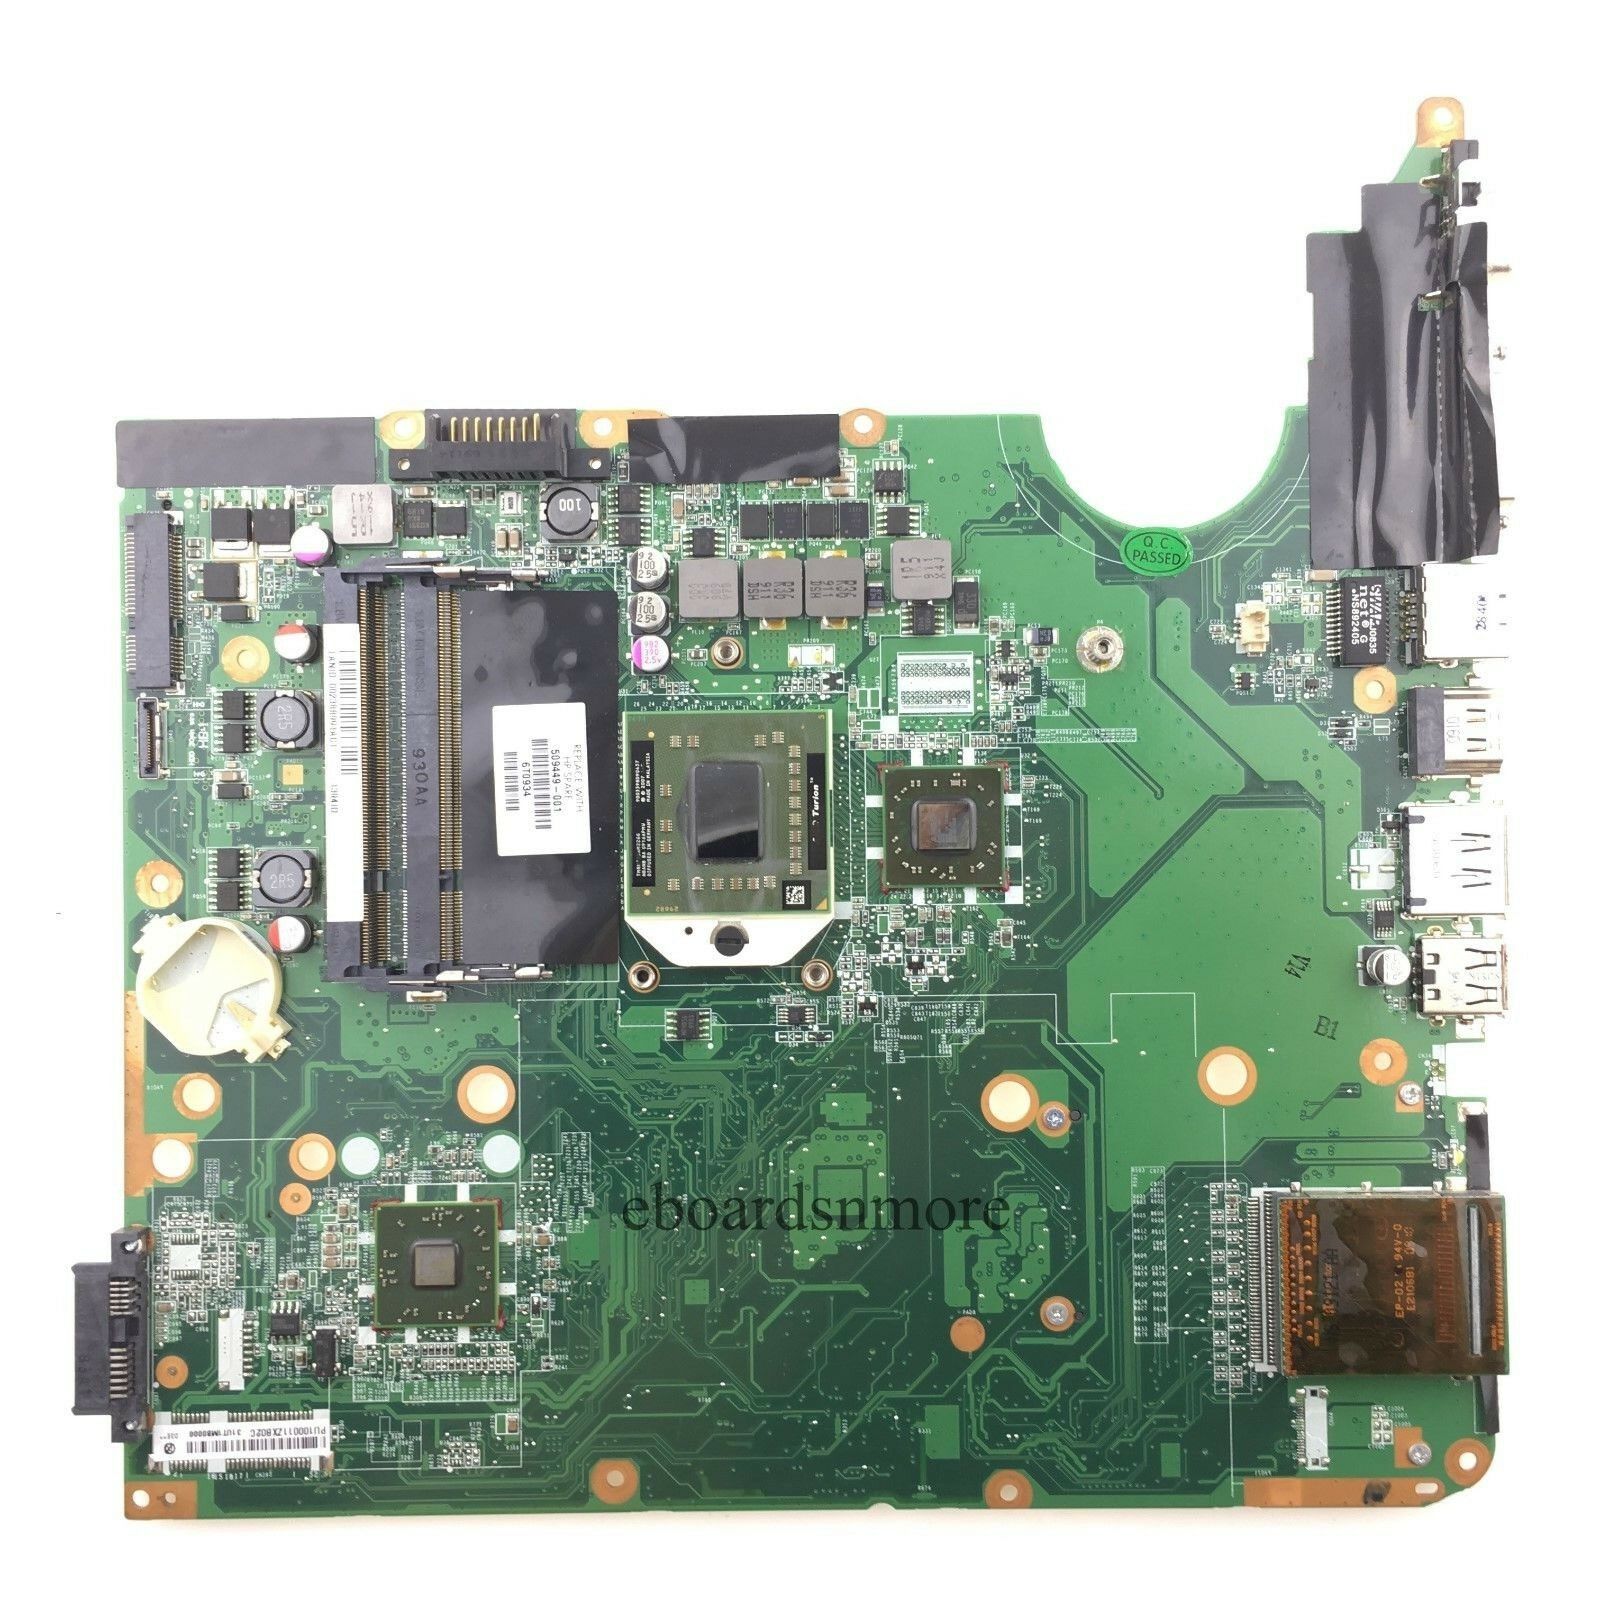 509449-001 AMD S1 MOTHERBOARD for HP PAVILION DV6-1100 Series Laptops, HD3200, A Compatible CPU Brand: AMD